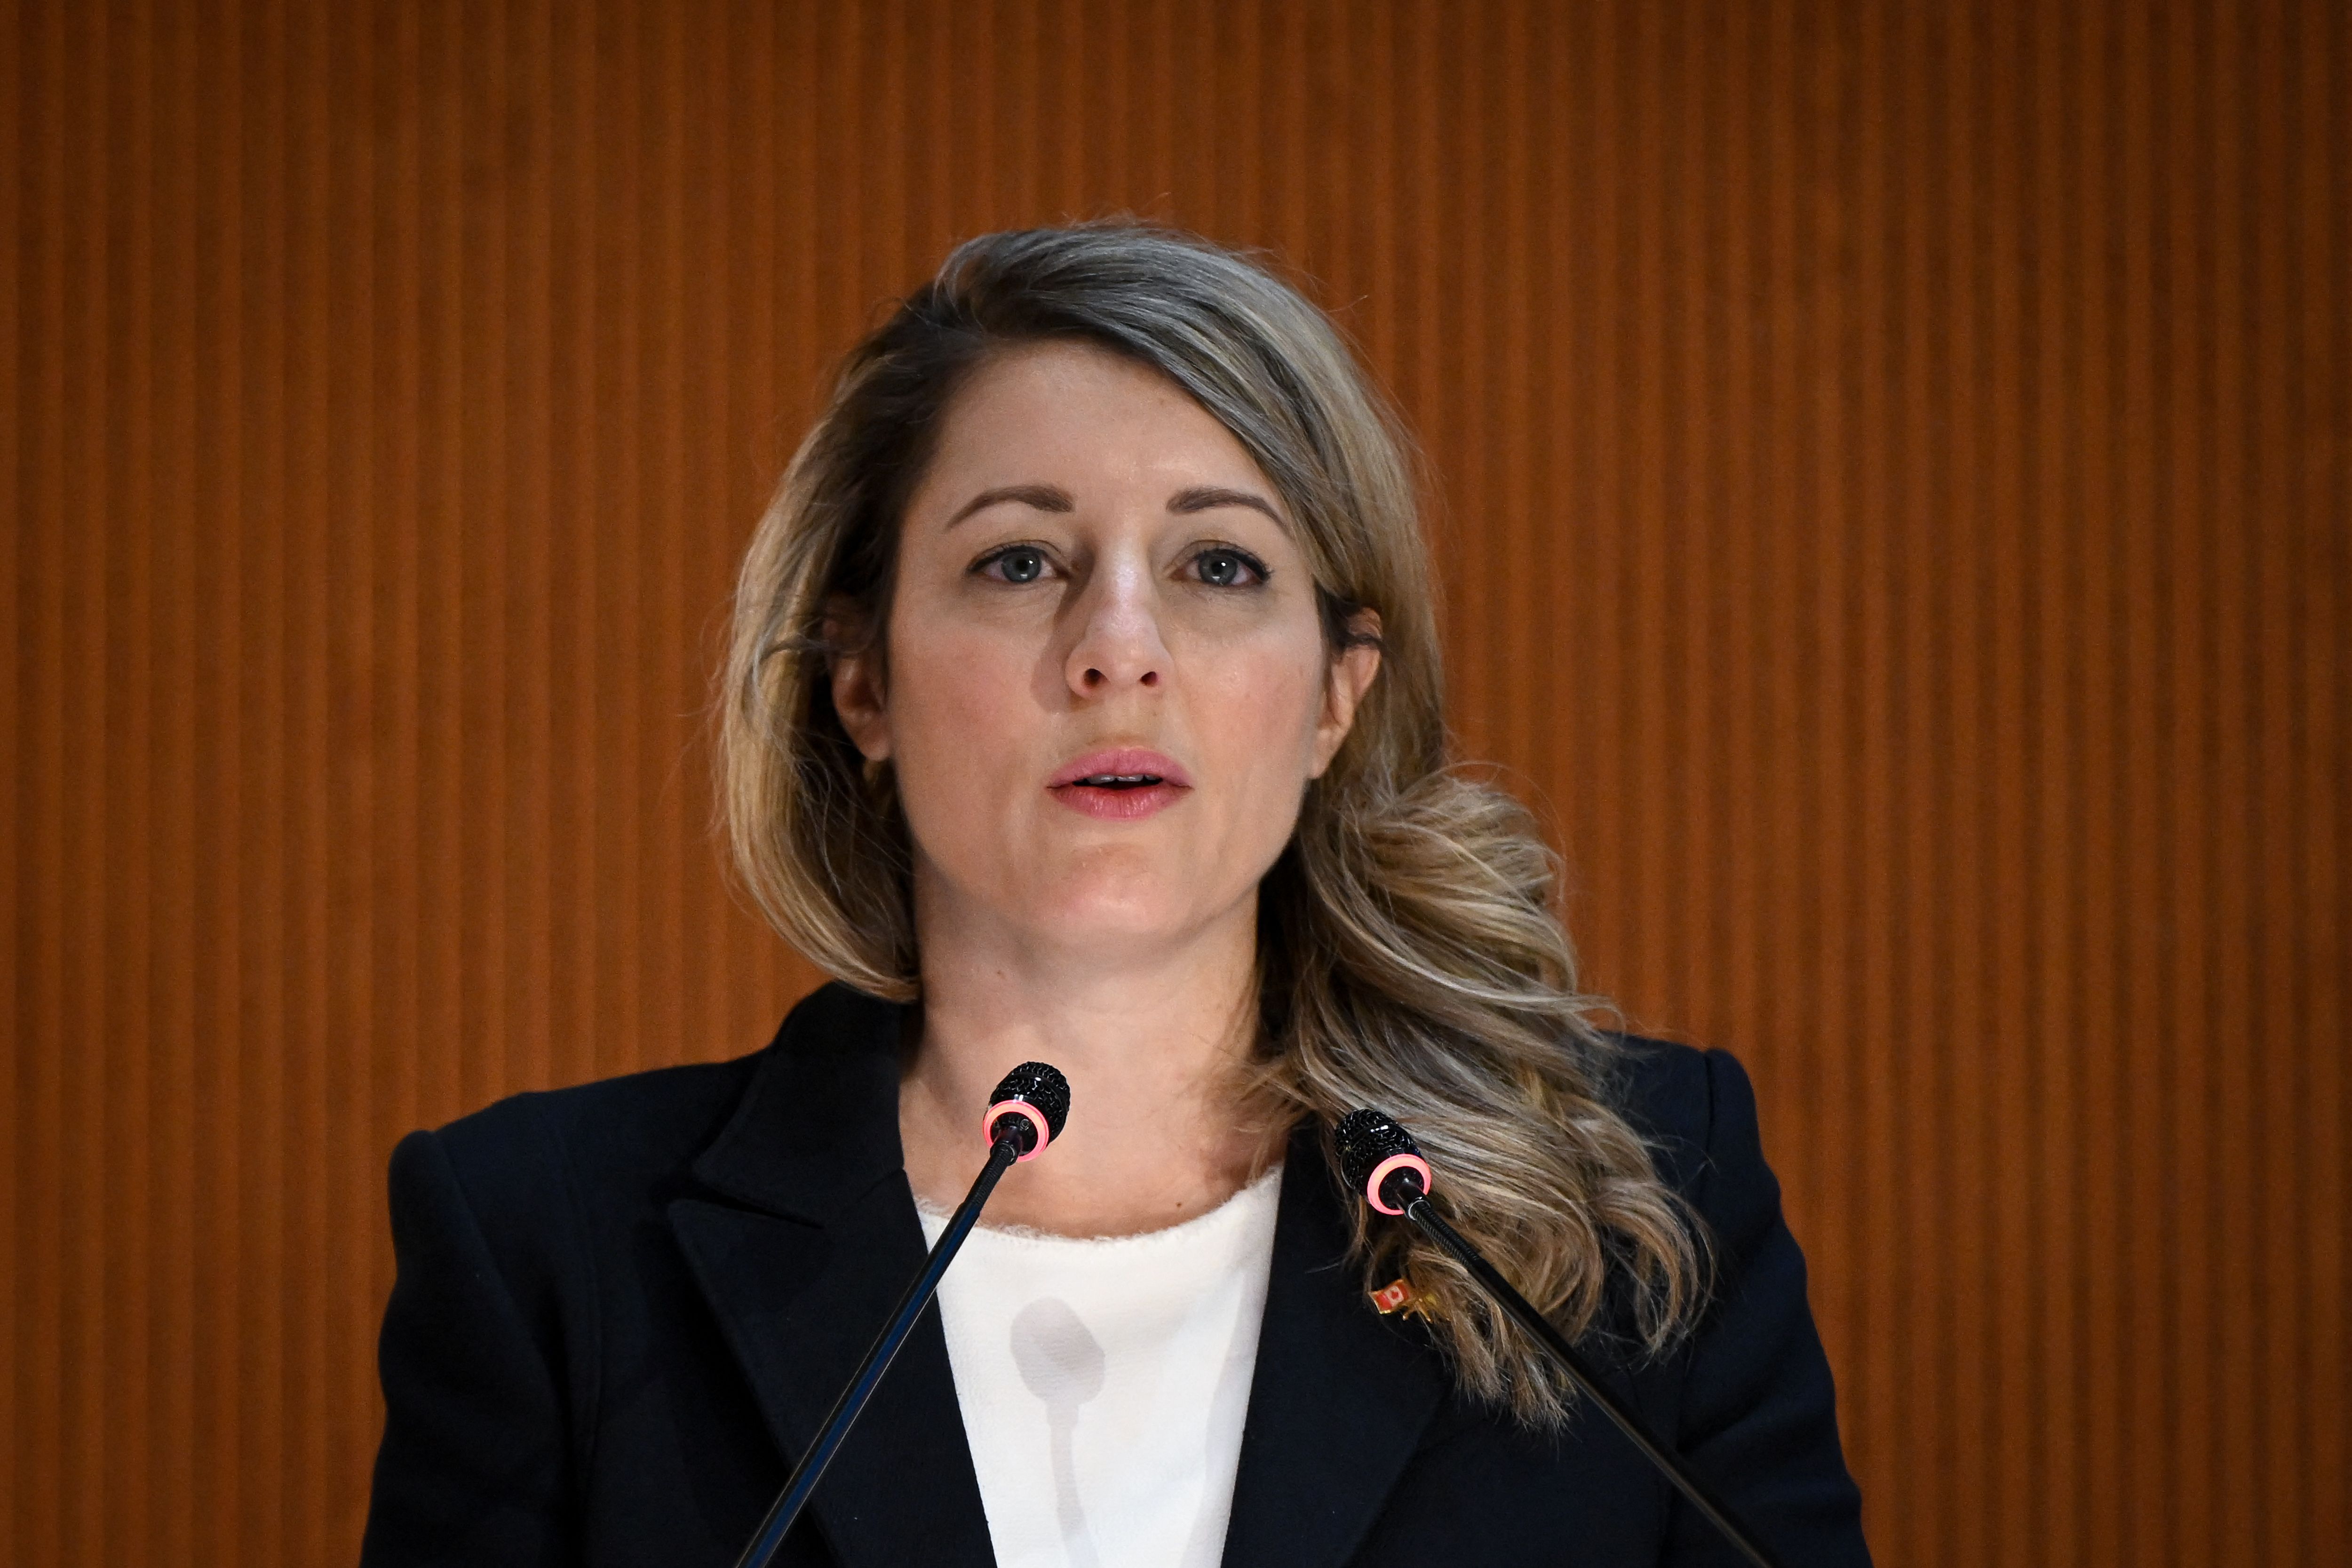 Canadian Foreign Minister Melanie Joly delivers a speech during a session of the UN Human Rights Council in Geneva, Switzerland, on February 28.